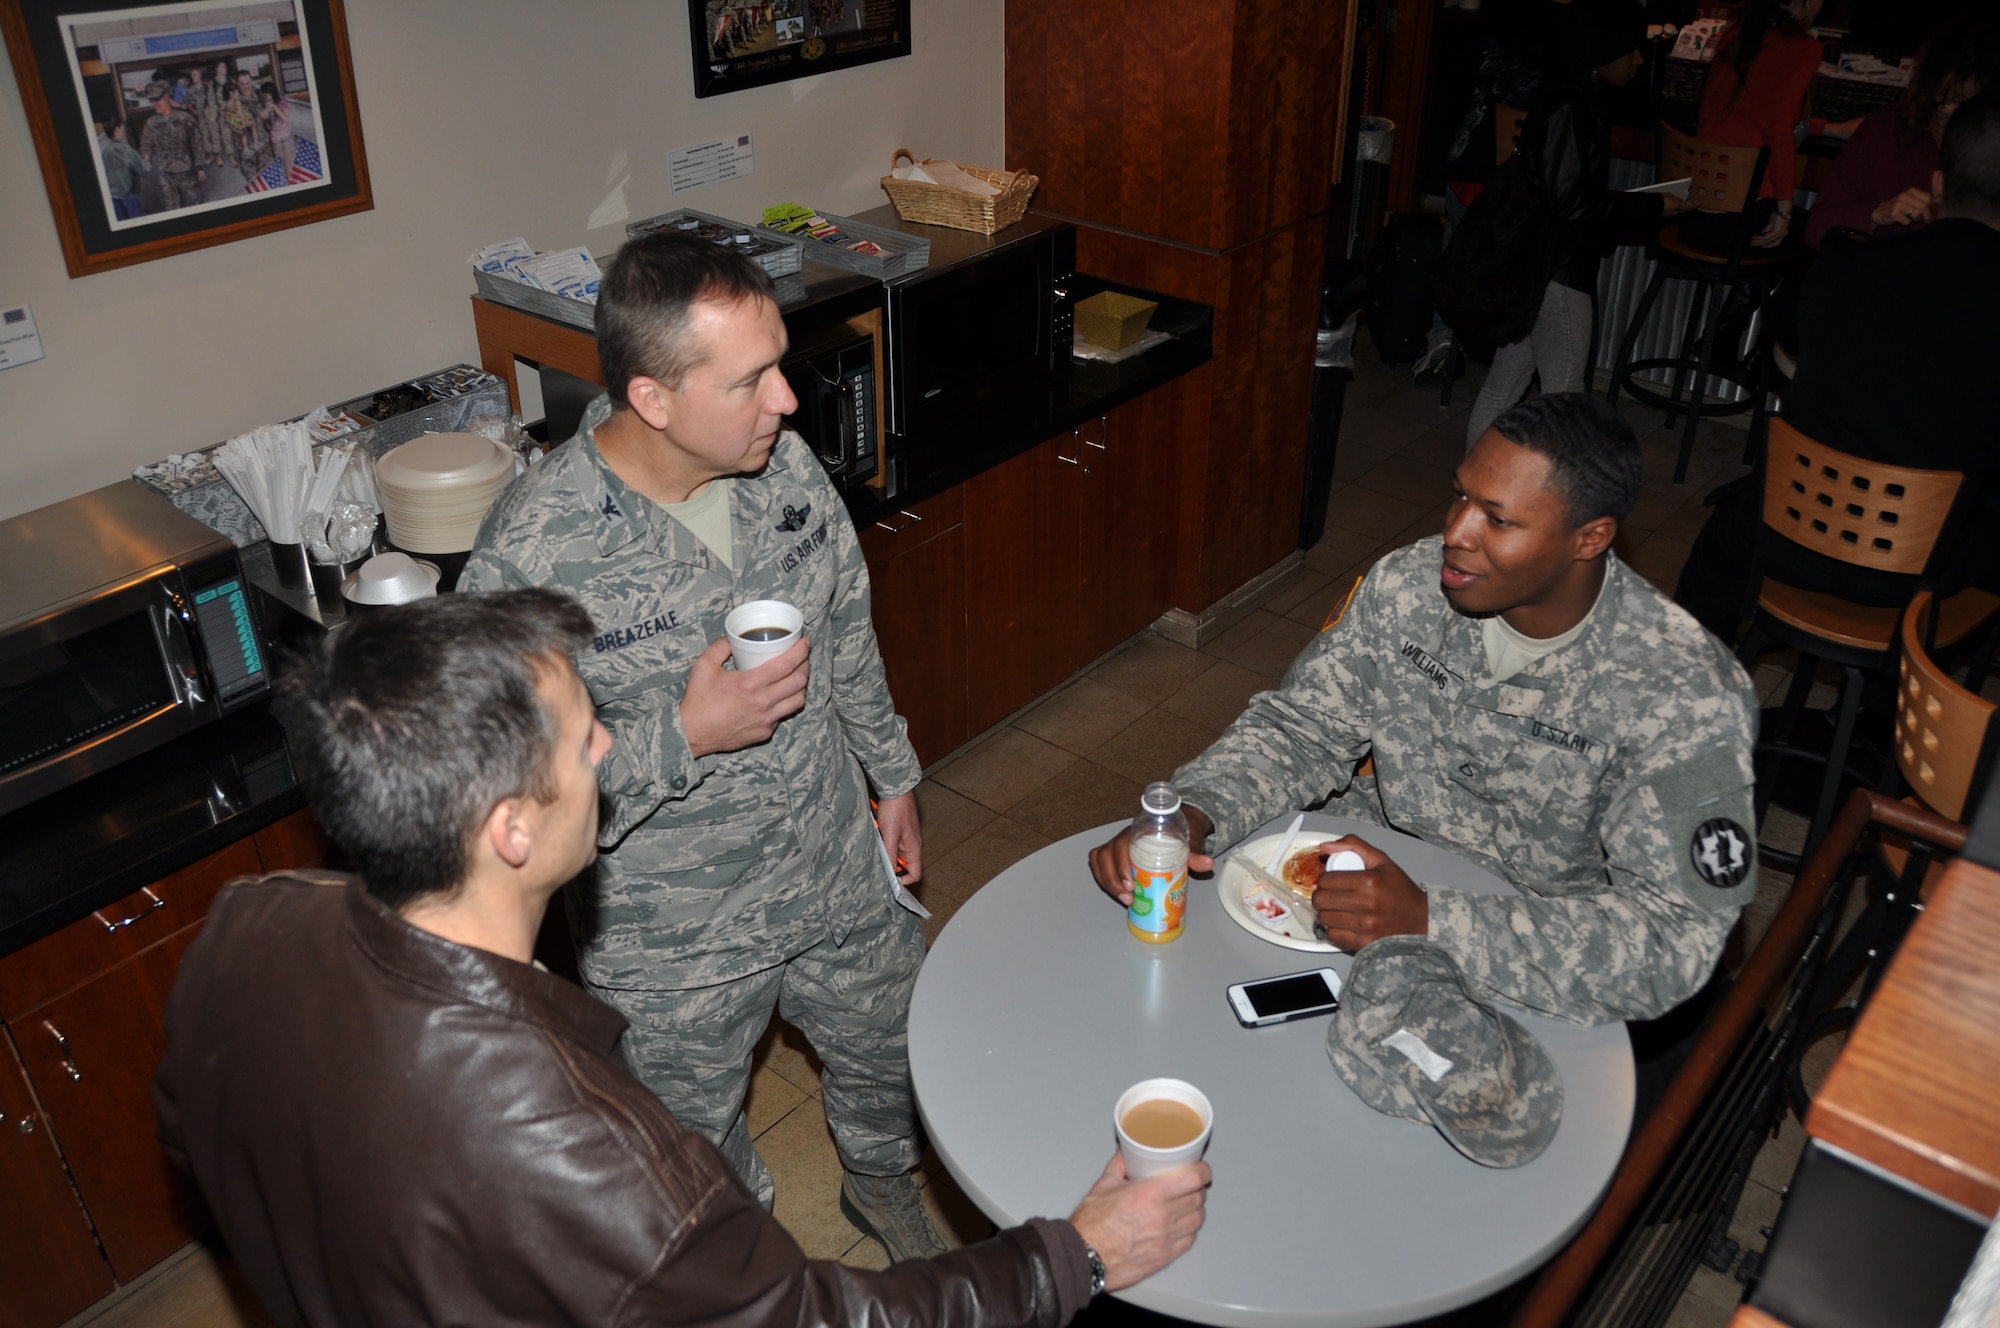 Col. Kevin Zeller, 301st Operations Group commander, left, and Col. John M. Breazeale, 301st Fighter Wing commander, center,  take time on Christmas eve to talk with traveling servicemembers at the USO at Dallas-Fort Worth International Airport while waiting for the arrival of several flights throughout the day bringing many of the wing's Airmen home from a two-month deployment to Afghanistan.  (U.S. Air Force photo/Laura Dermarderosiansmith) 